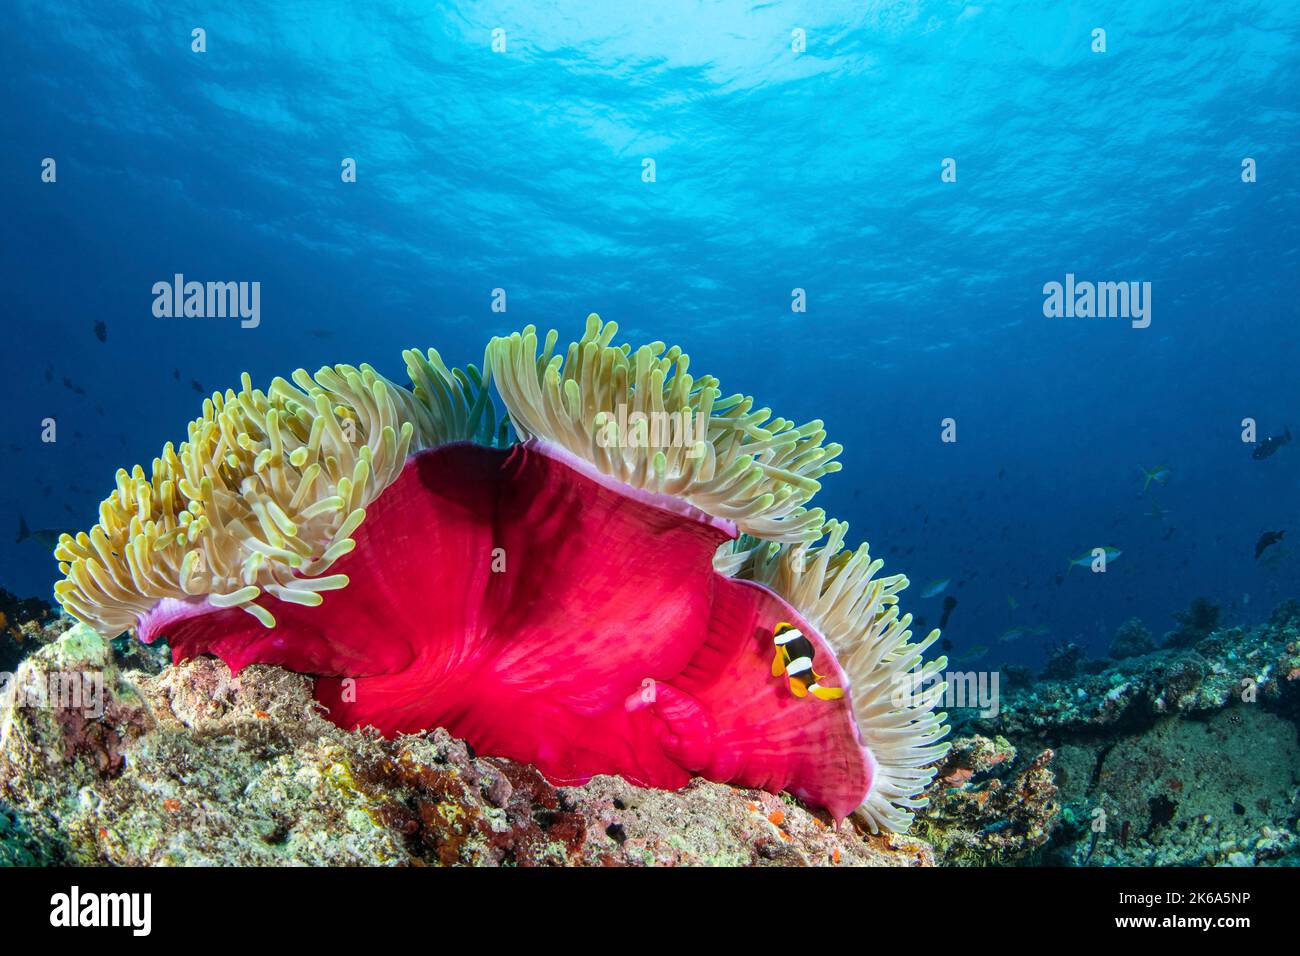 An anemone fish and its red anemone home, Maldives. Stock Photo